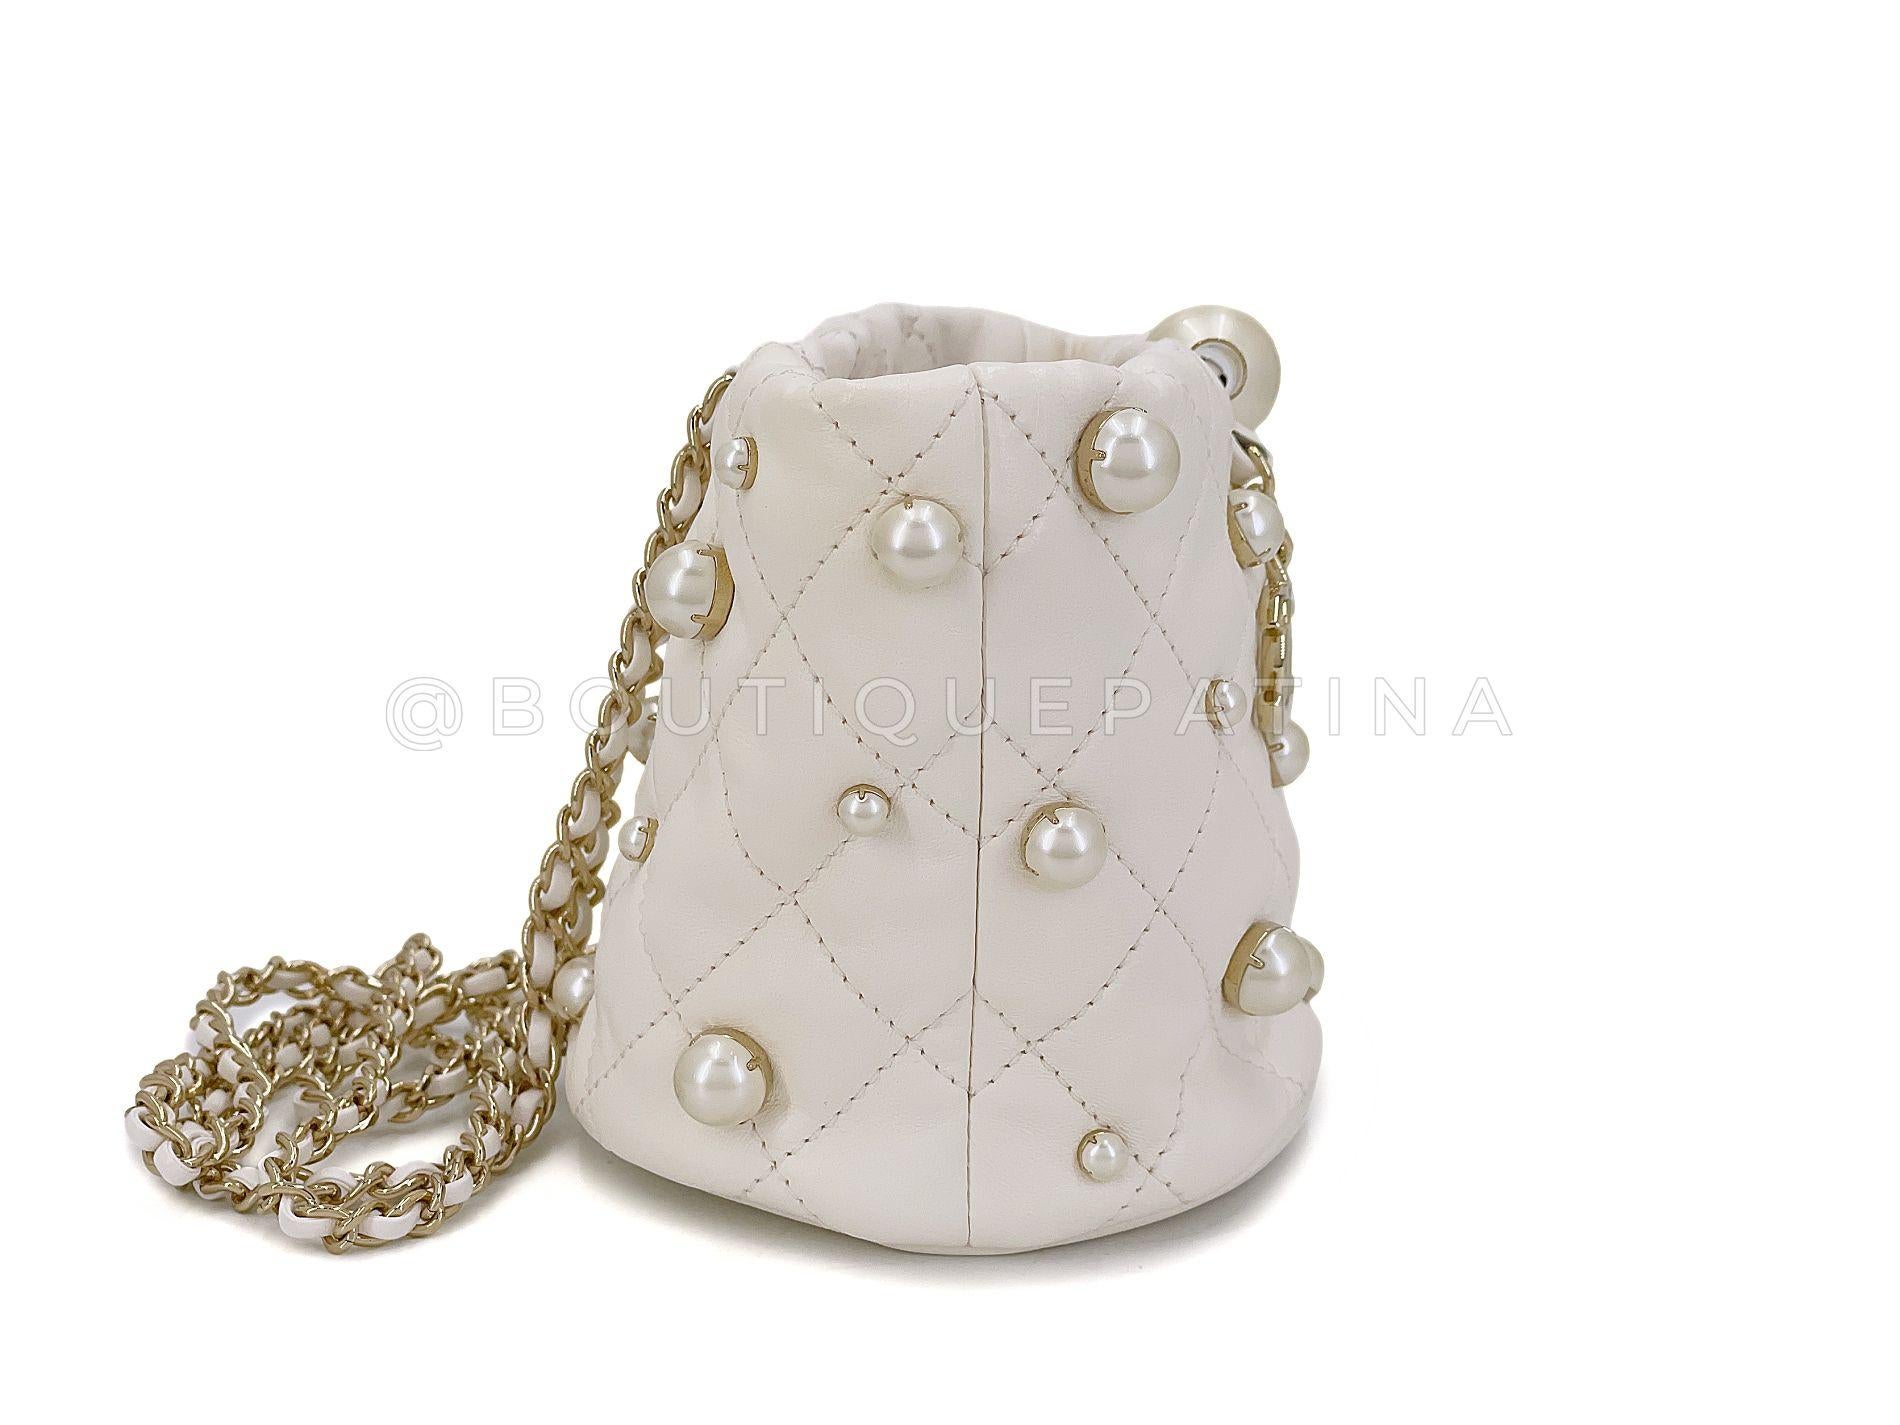 Women's Chanel 21S White Cream About Pearls Bucket Bag Mini  67973 For Sale